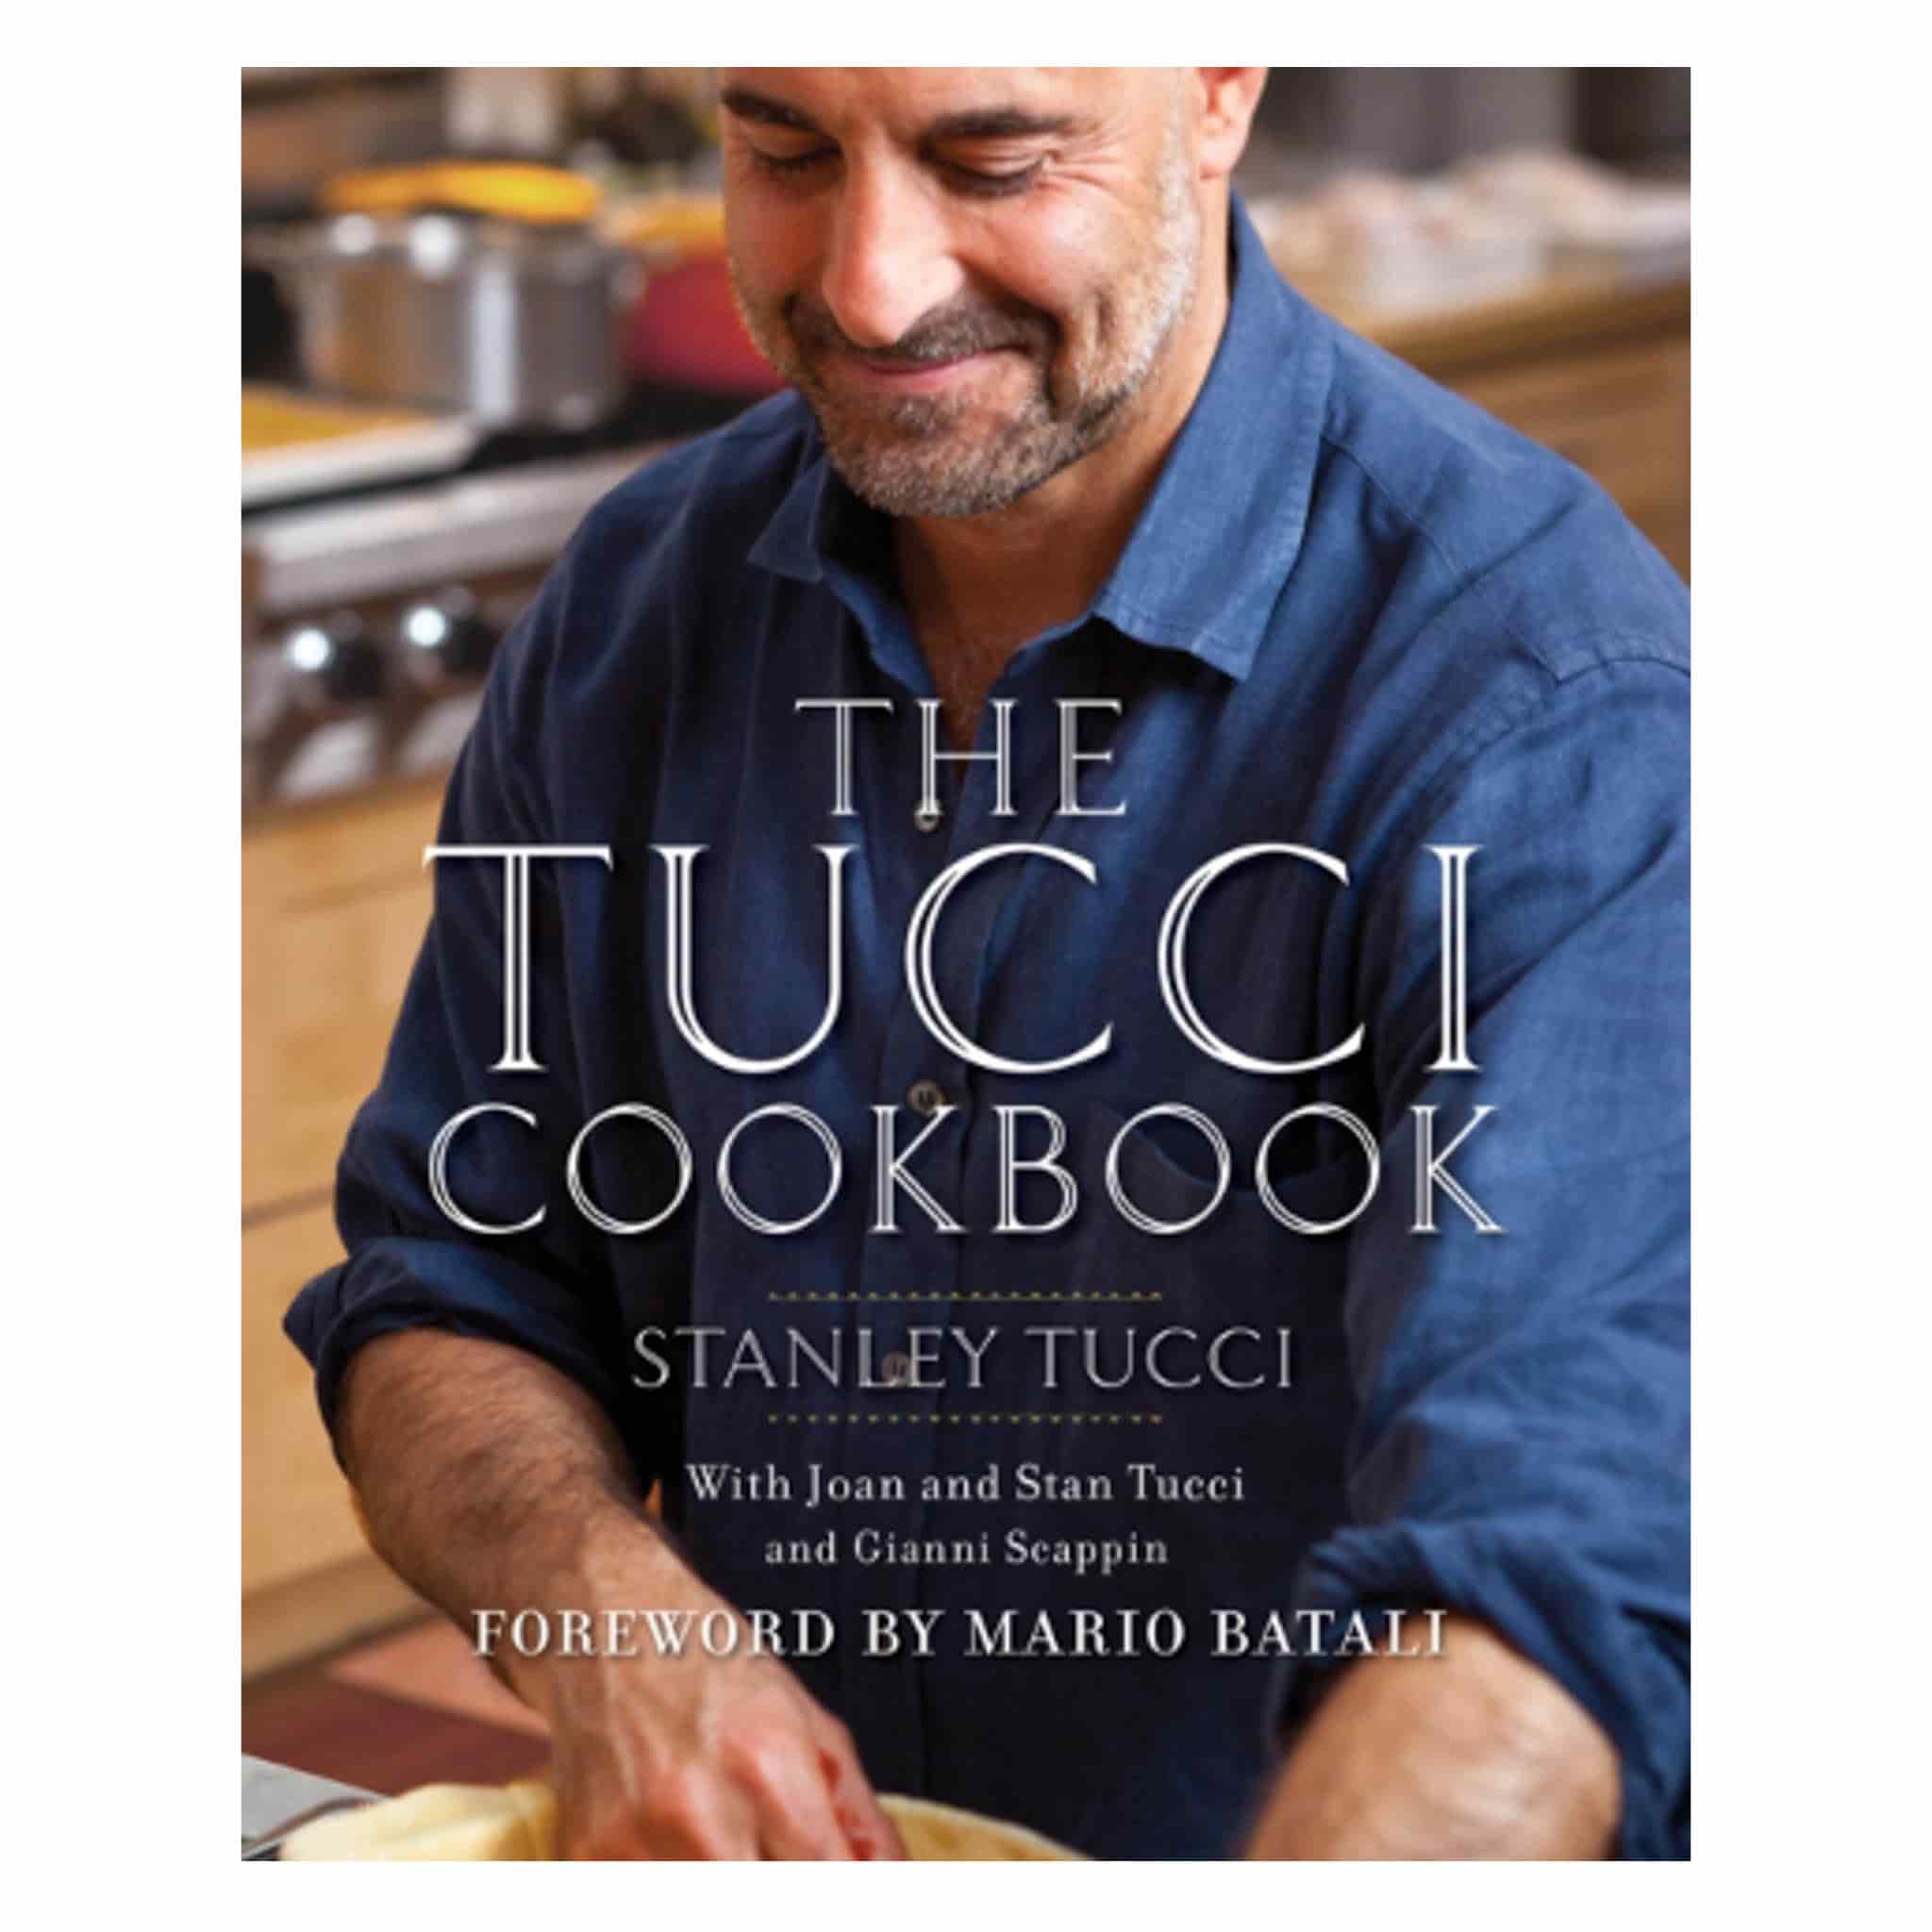 The Tucci Cookbook: Family, Friends, and Food, by Stanley Tucci